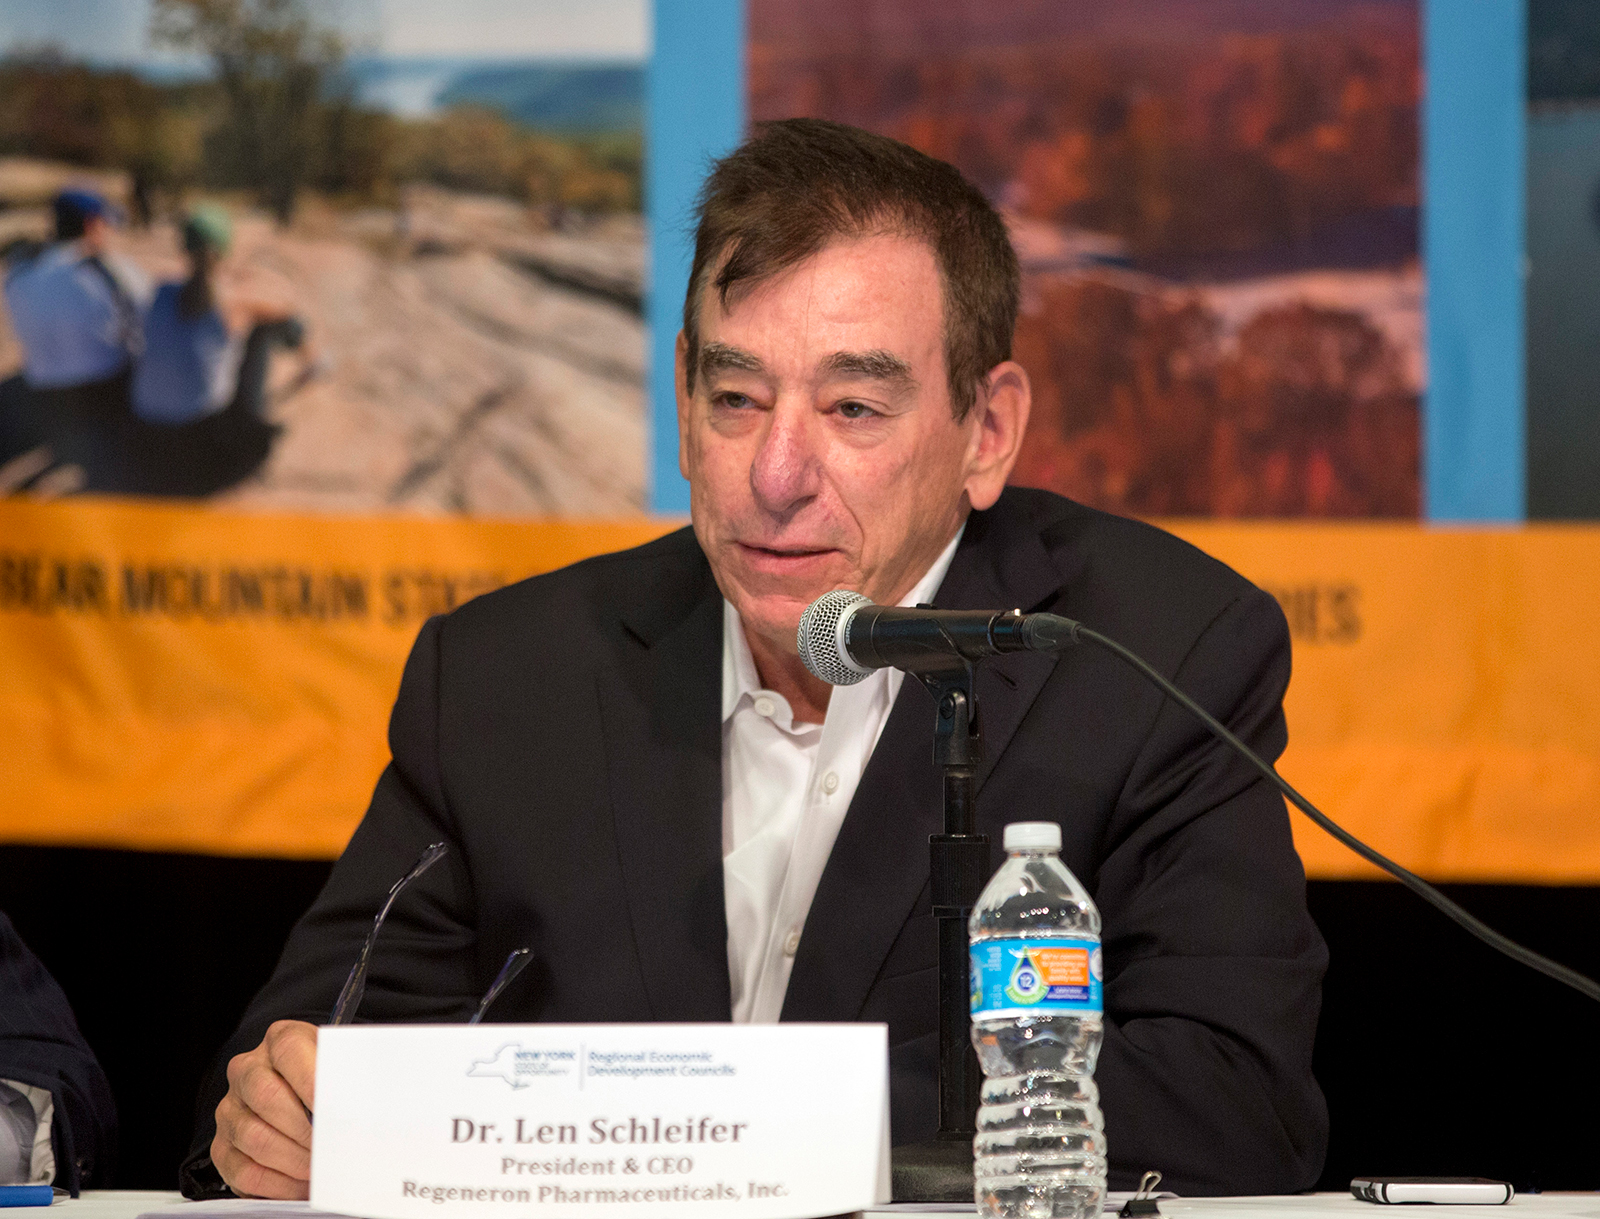 Dr. Len Schleifer, president and CEO of Regeneron, speaks during a hearing in Albany, New York, on October 20, 2015.